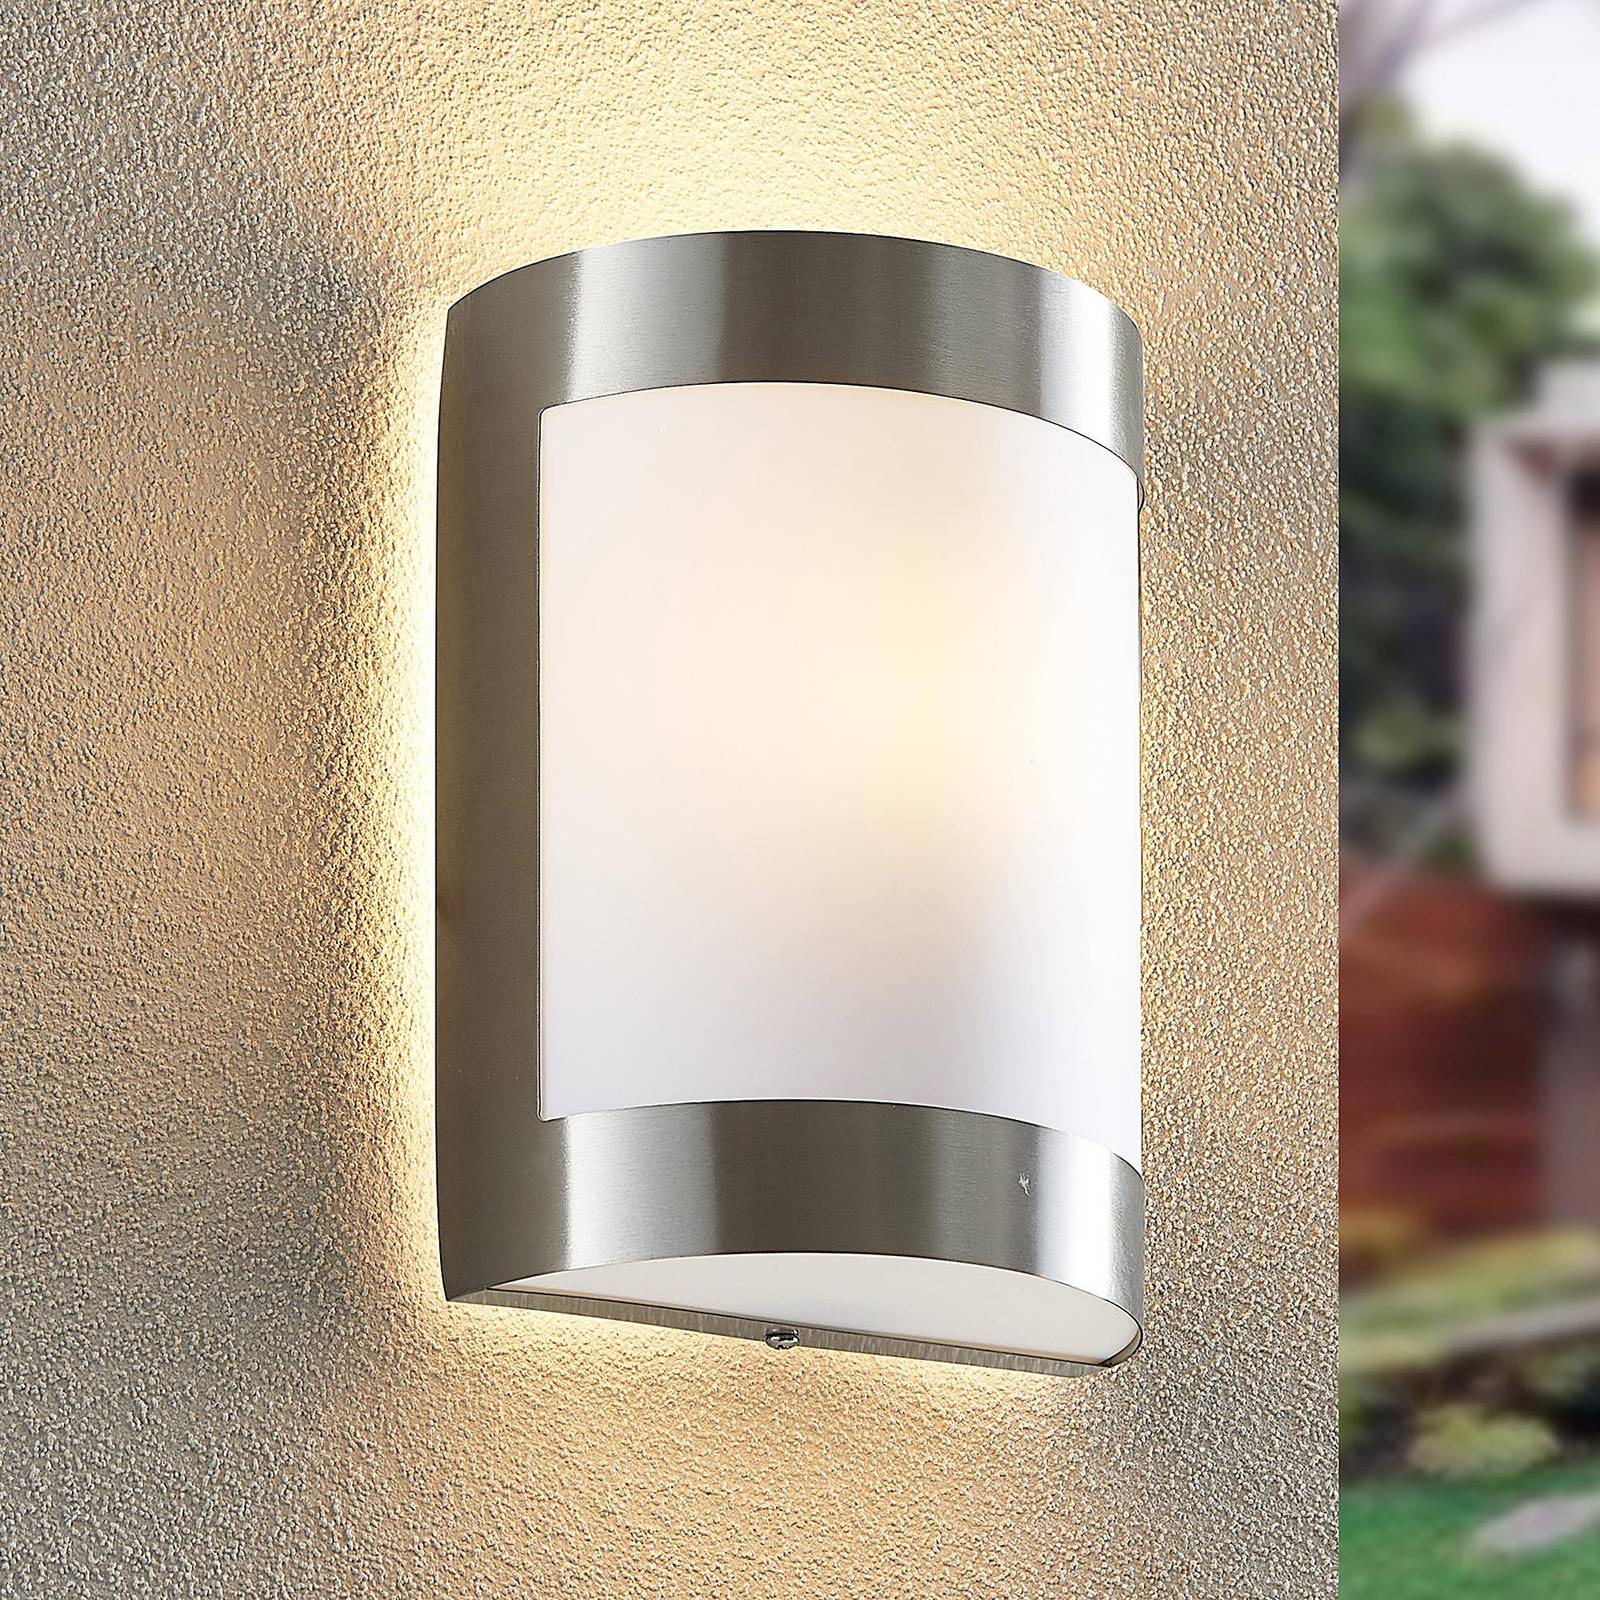 ELC Kiaan outdoor wall light without stripes